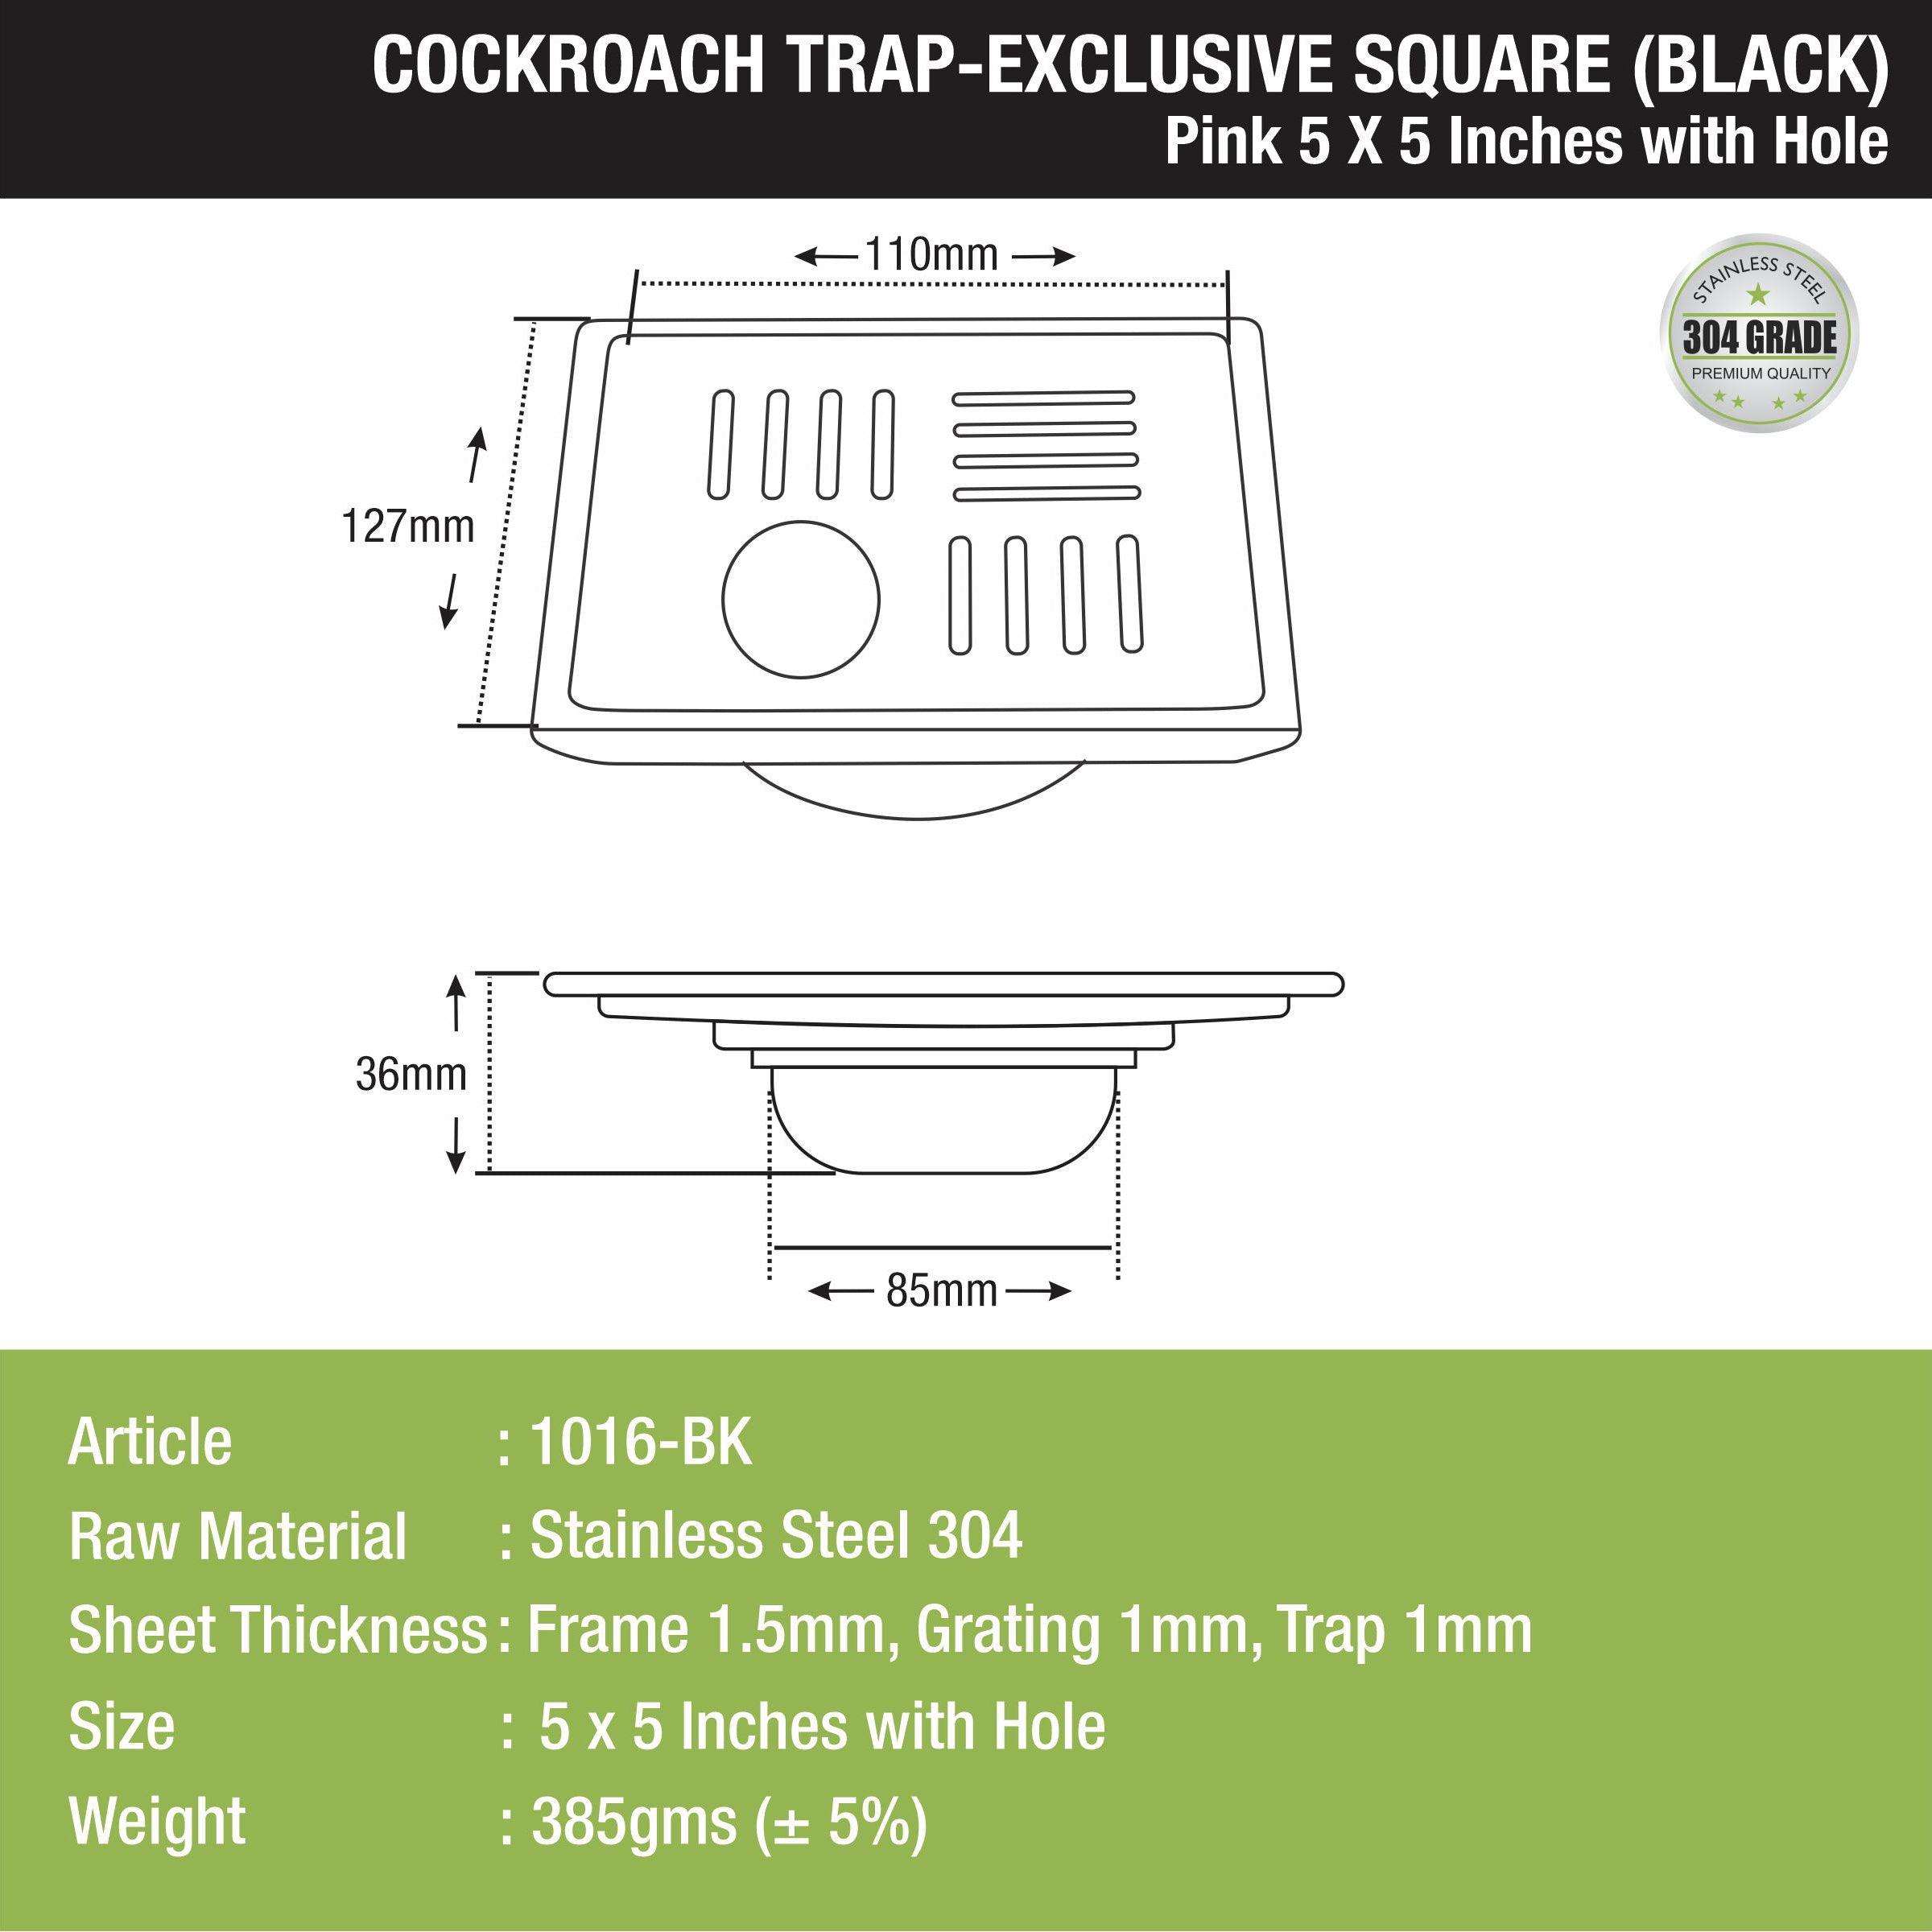 Pink Exclusive Square Floor Drain in Black PVD Coating (5 x 5 Inches) with Hole & Cockroach Trap size and measurement